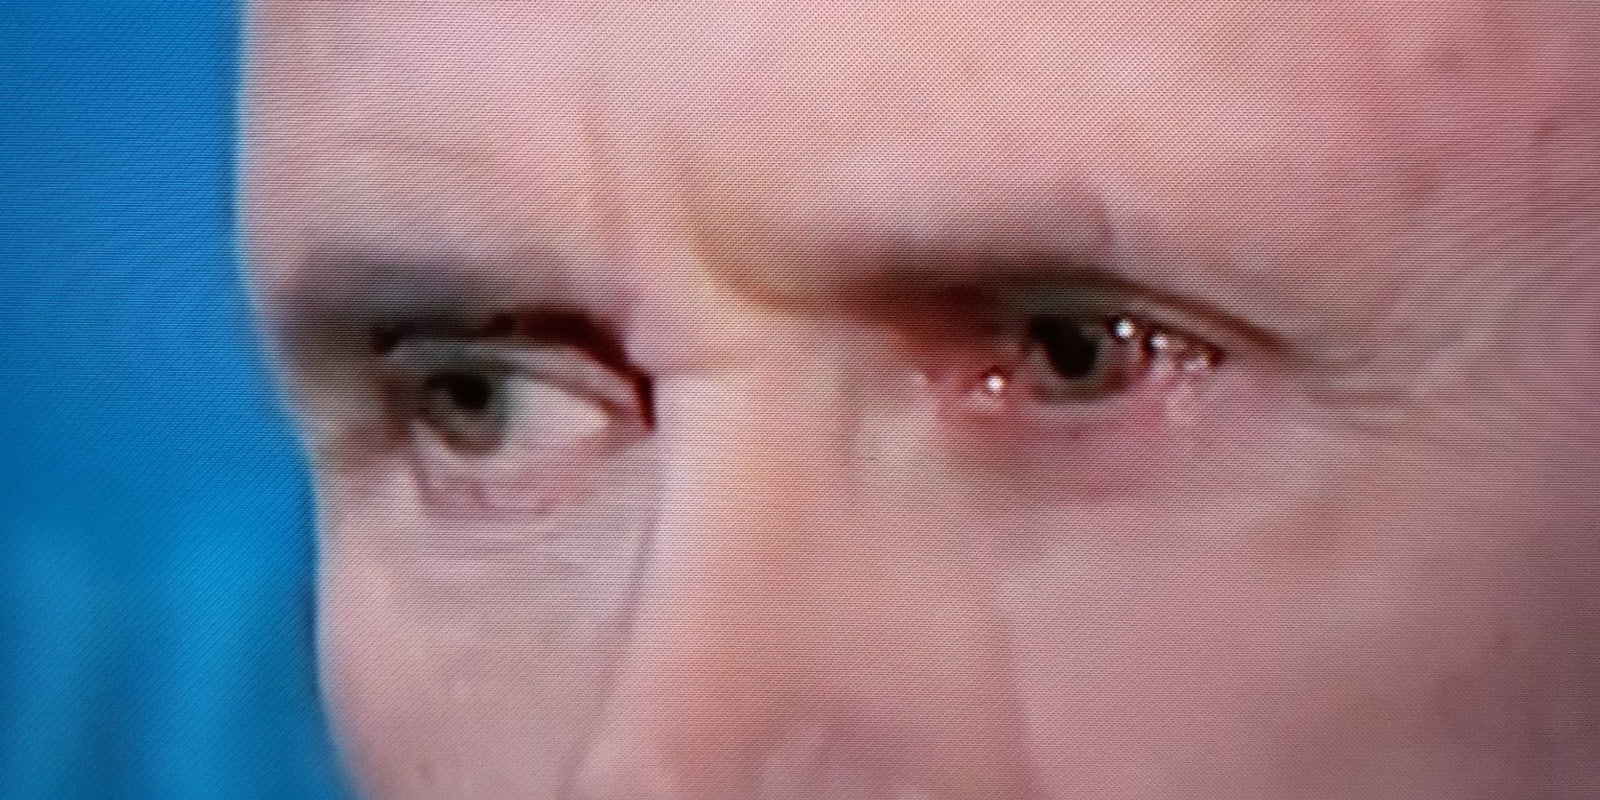 Vice President Mike Pence's eyes